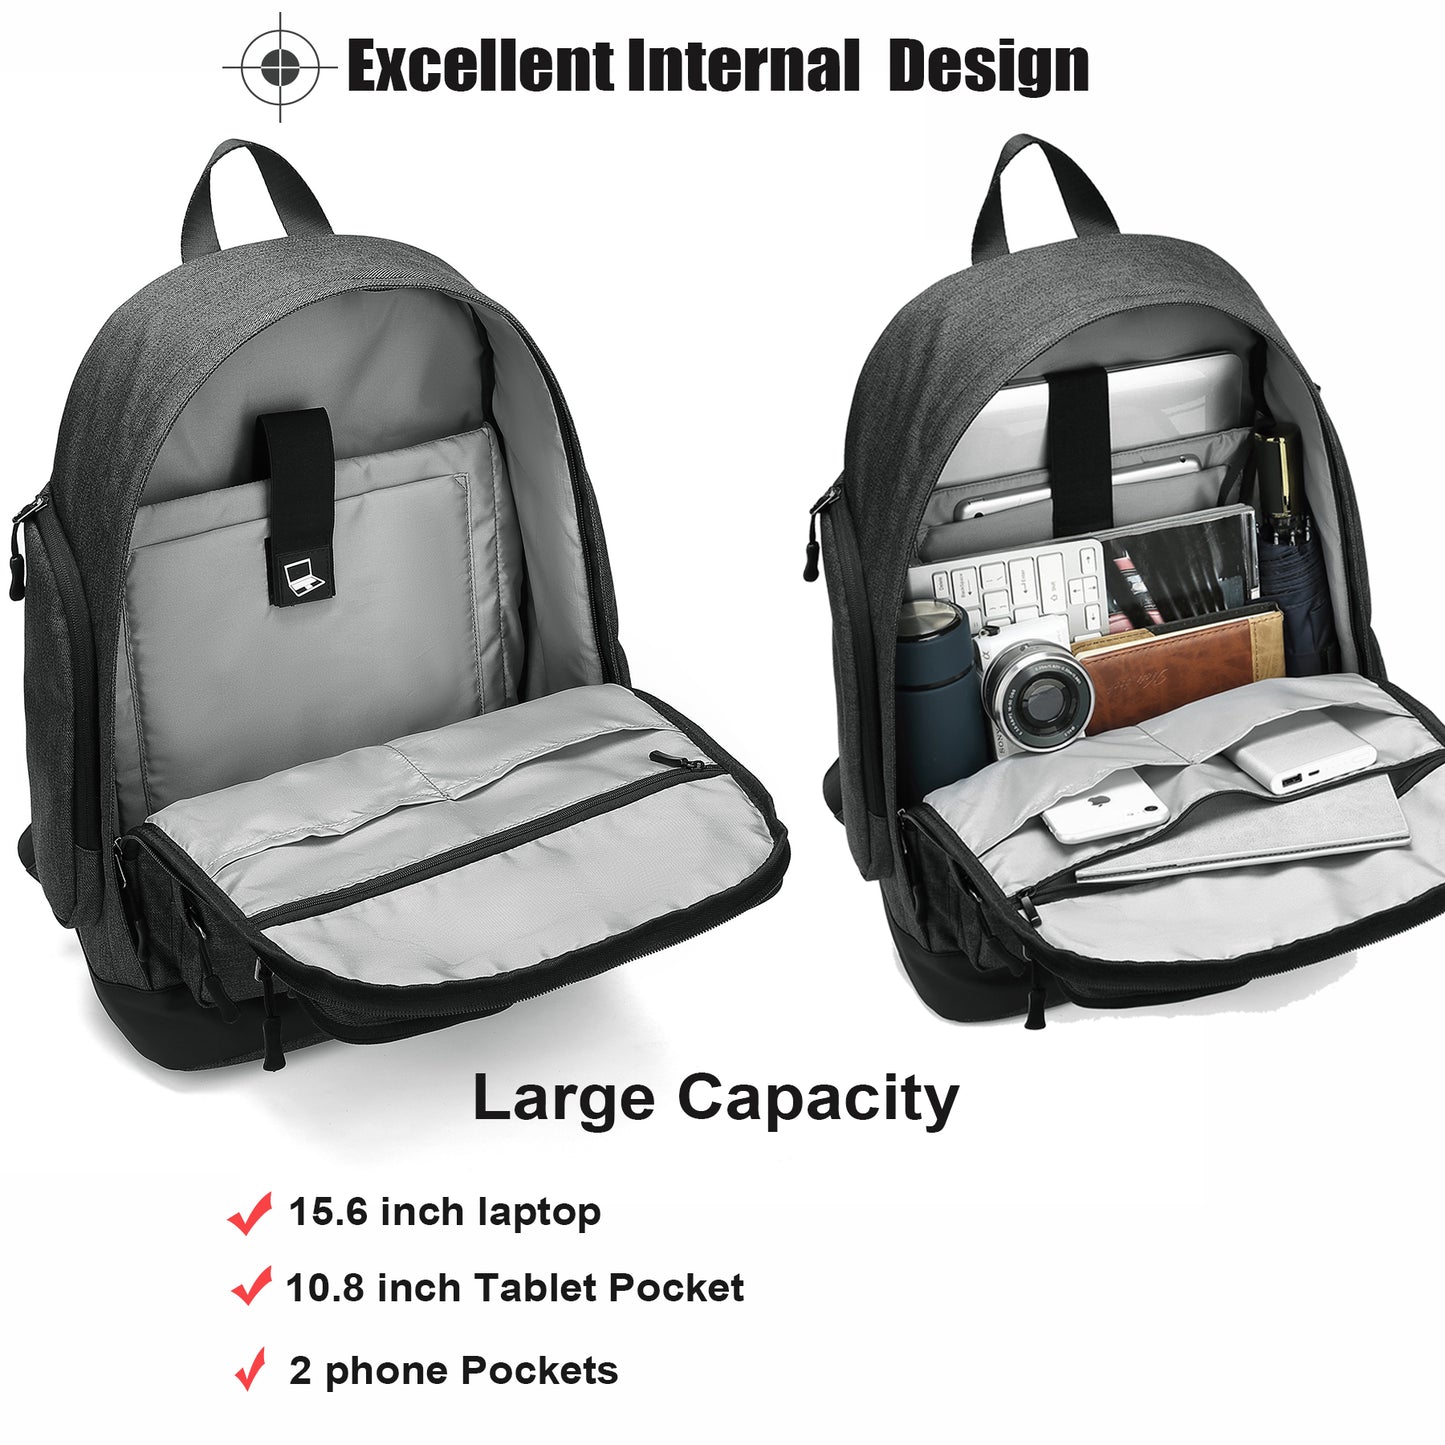 JANSBEN Business Laptop Backpack fit UP to 17 inch Laptop